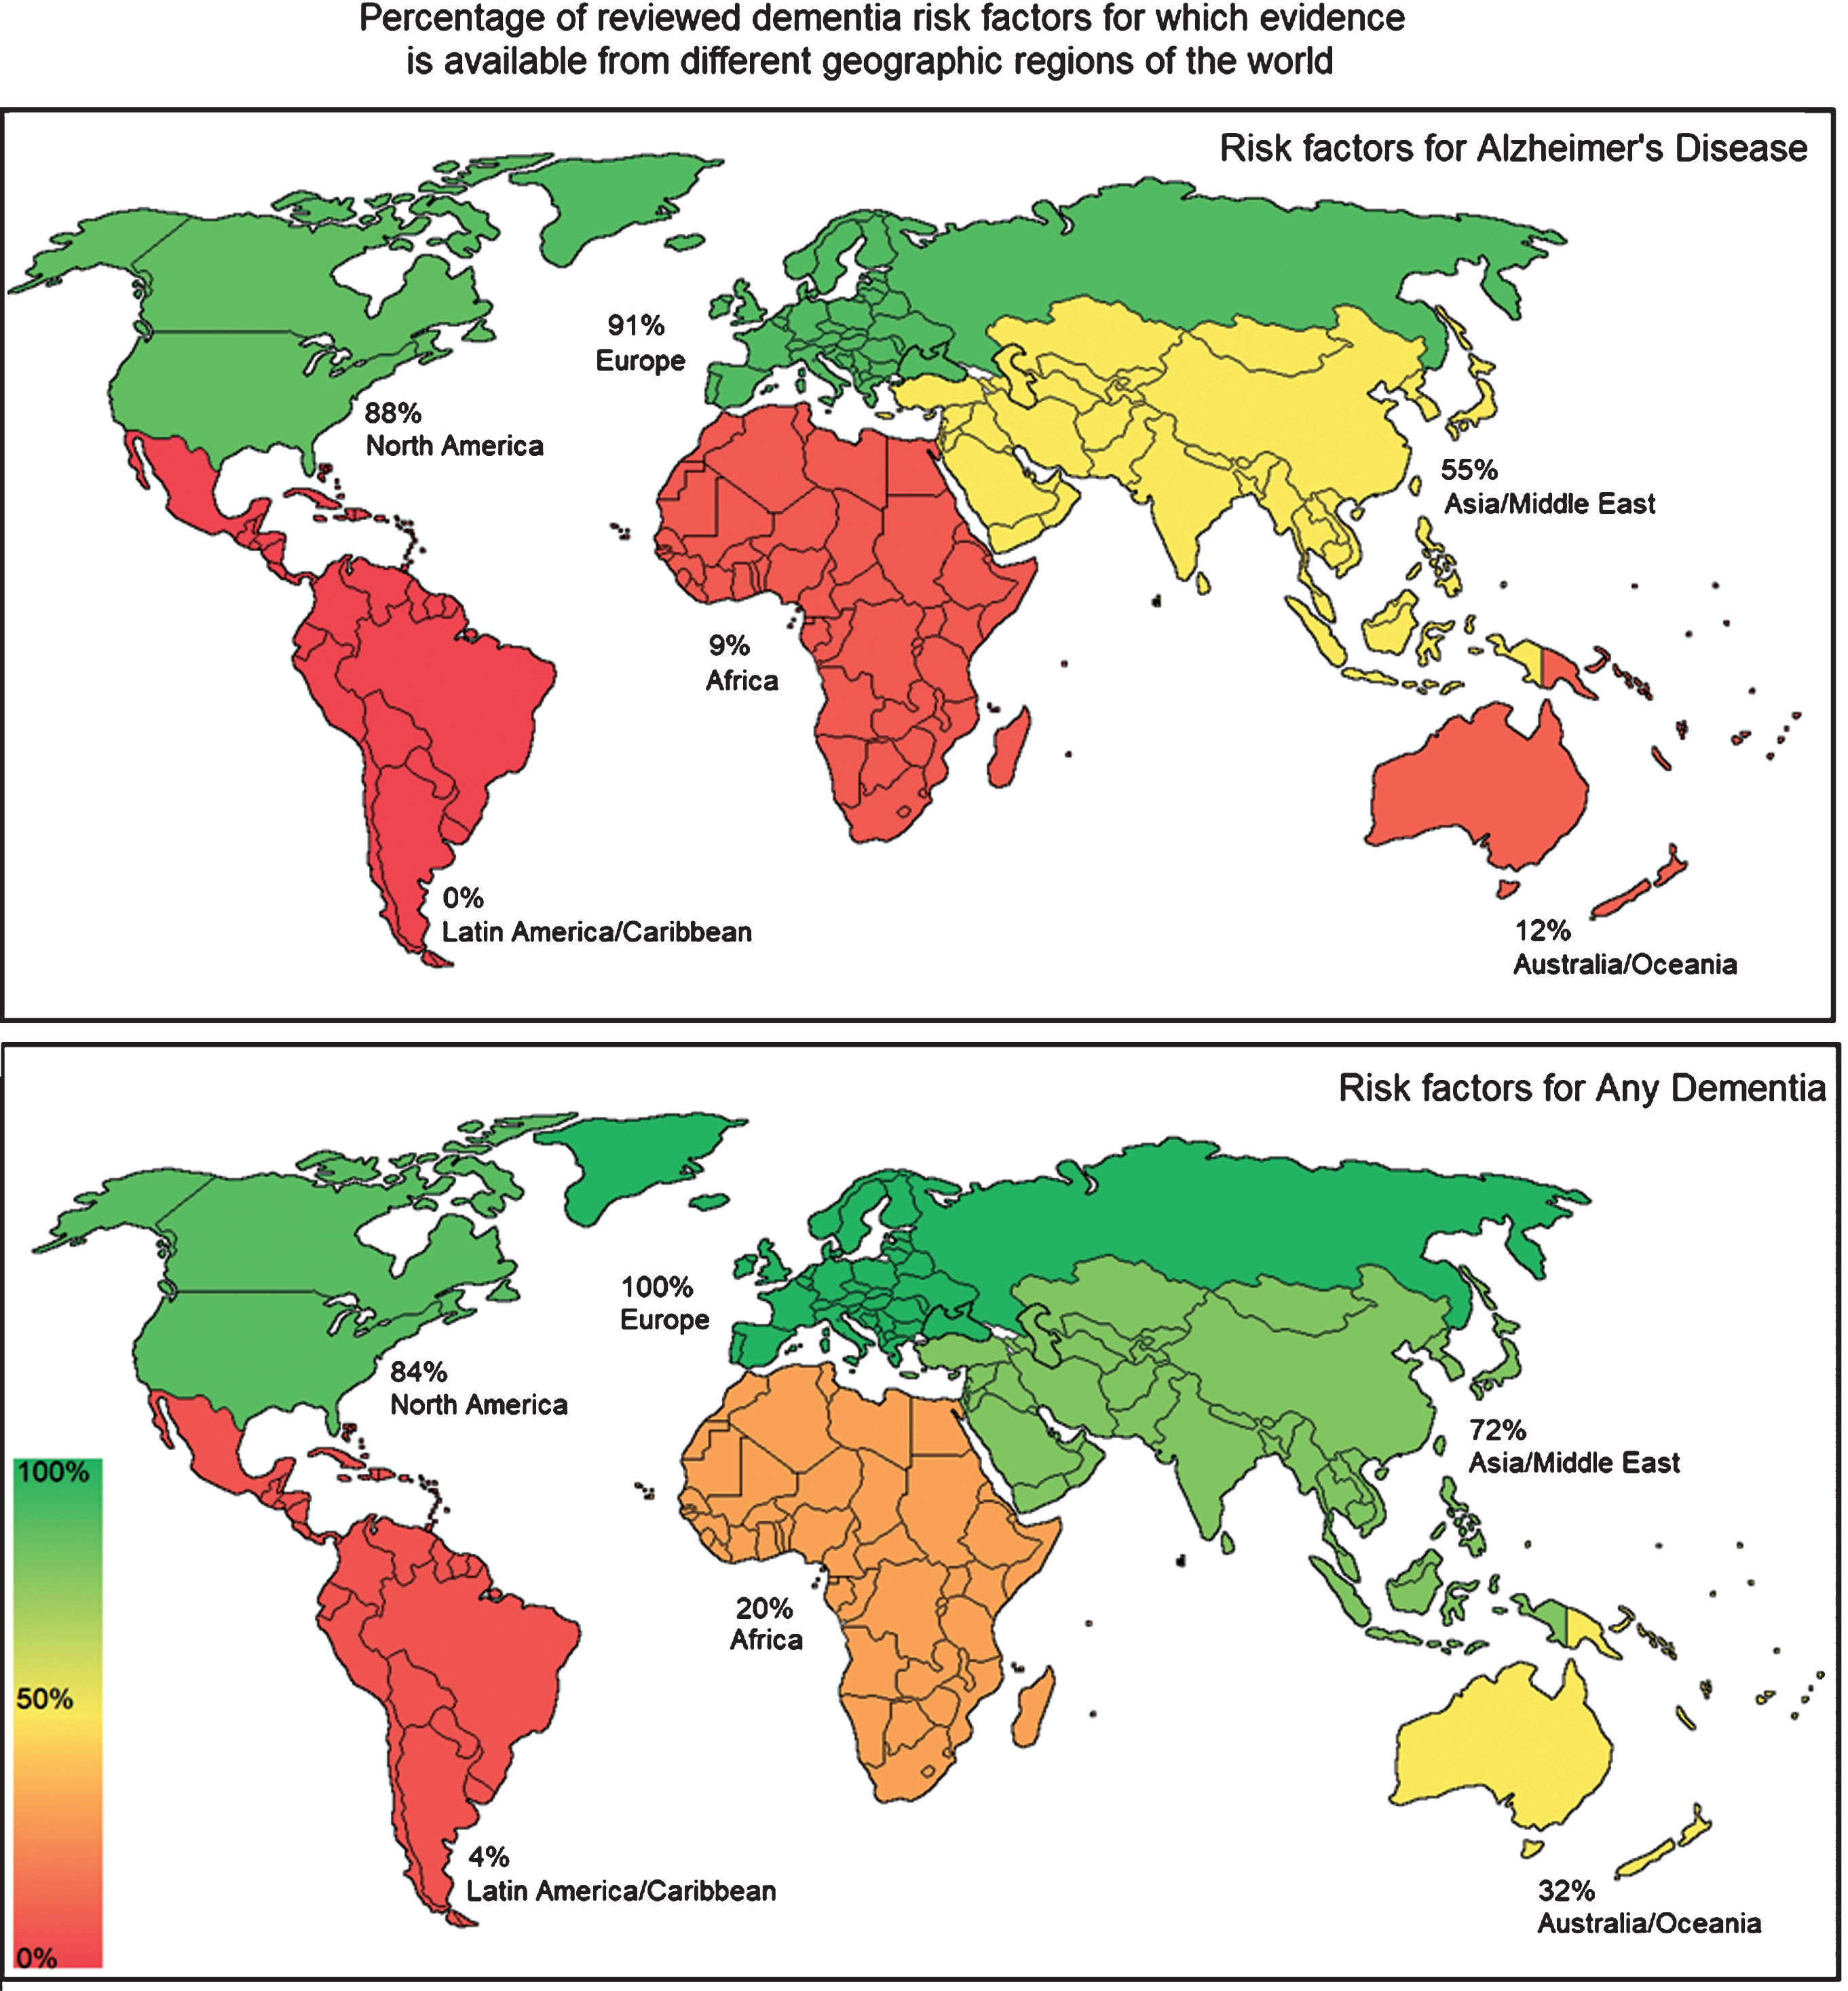 World maps showing distribution of evidence on risk factors for Alzheimer’s disease and Any Dementia.